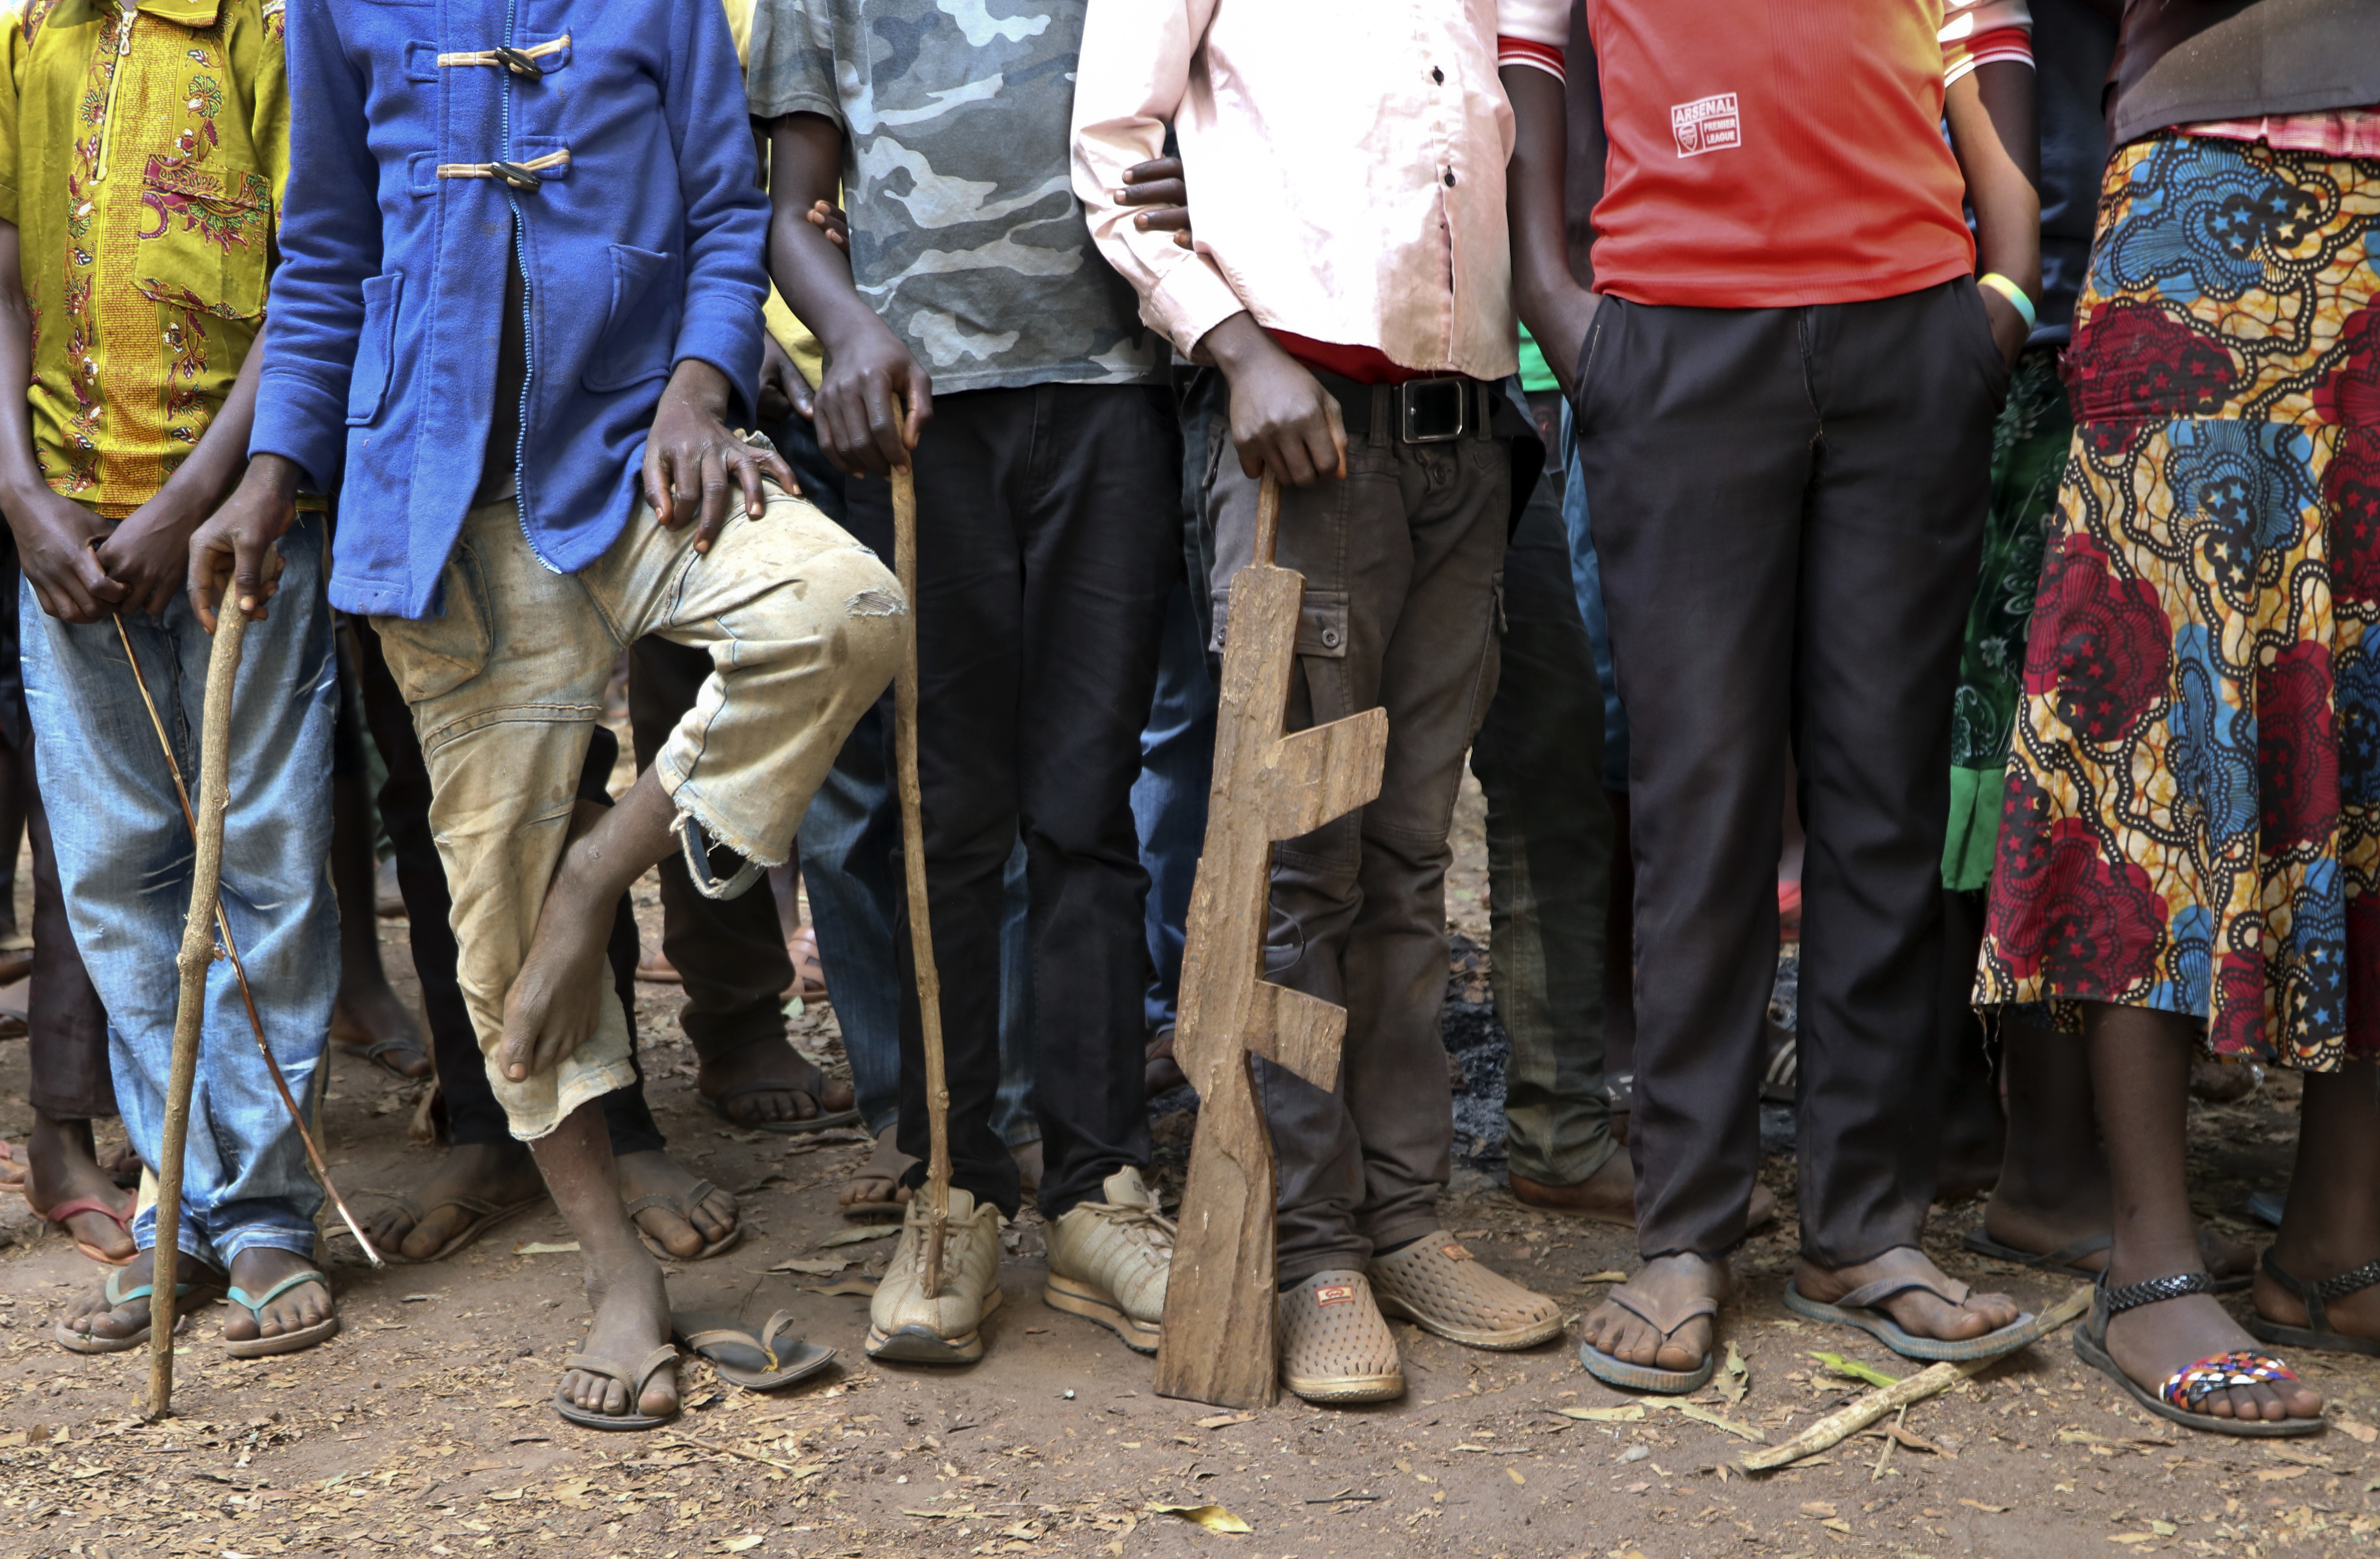 Former child soldiers stand in line waiting to be registered with UNICEF to receive a release package, in Yambio, South Sudan Wednesday, Feb. 7, 2018. More than 300 child soldiers were released Wednesday by armed groups in South Sudan, the second-largest such release since civil war began five years ago. (AP Photo/Sam Mednick)